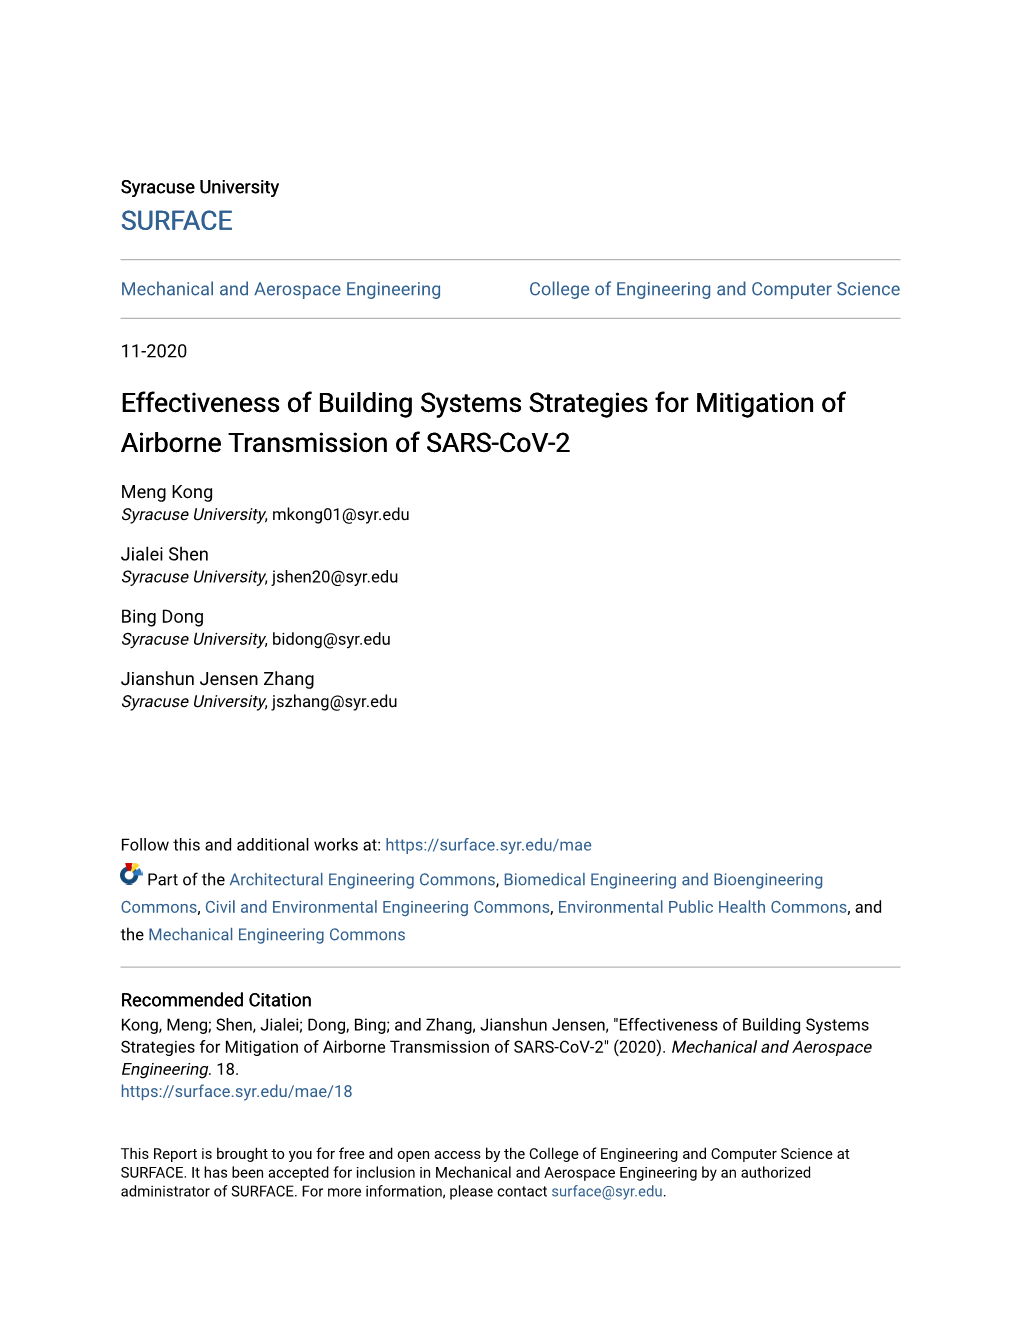 Effectiveness of Building Systems Strategies for Mitigation of Airborne Transmission of SARS-Cov-2